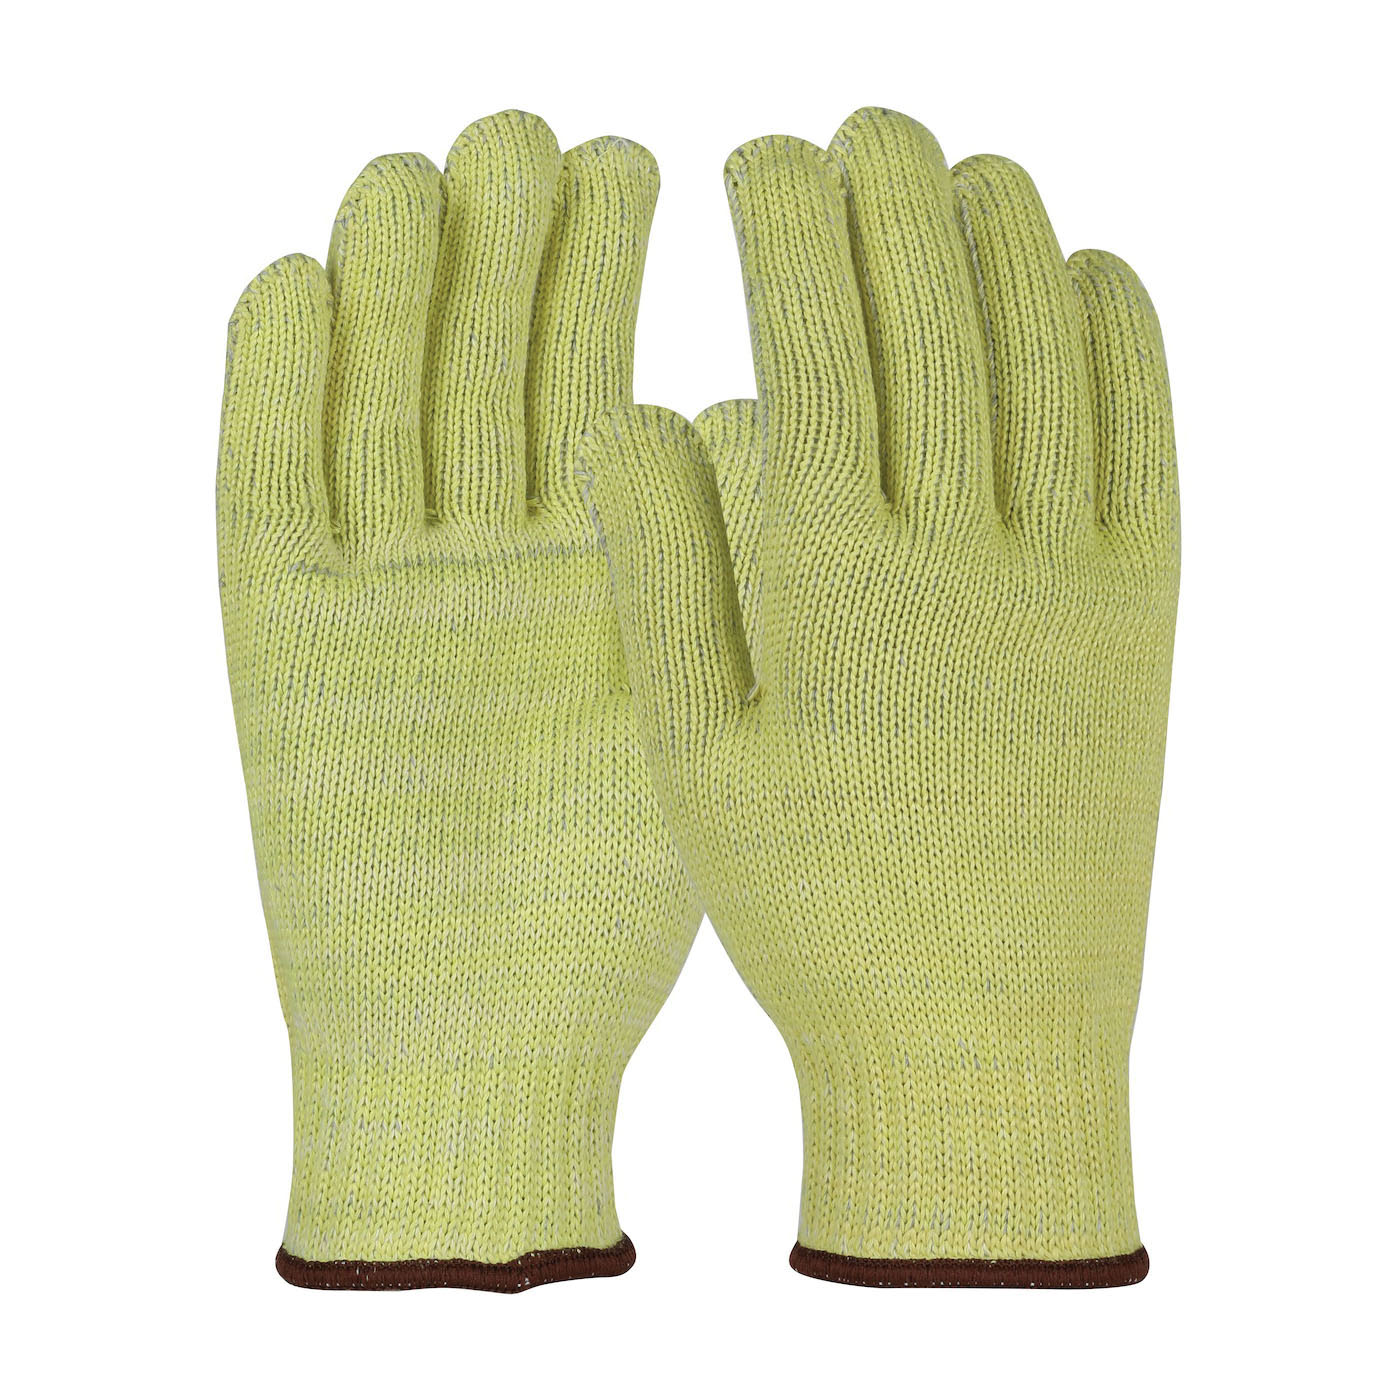 Kut Gard® 07-KA744/S Economy Weight Cut-Resistant Gloves, S, ACP™/Kevlar®, Knit Wrist Cuff, Resists: Abrasion, Cut and Heat, ANSI Cut-Resistance Level: A3, Paired Hand